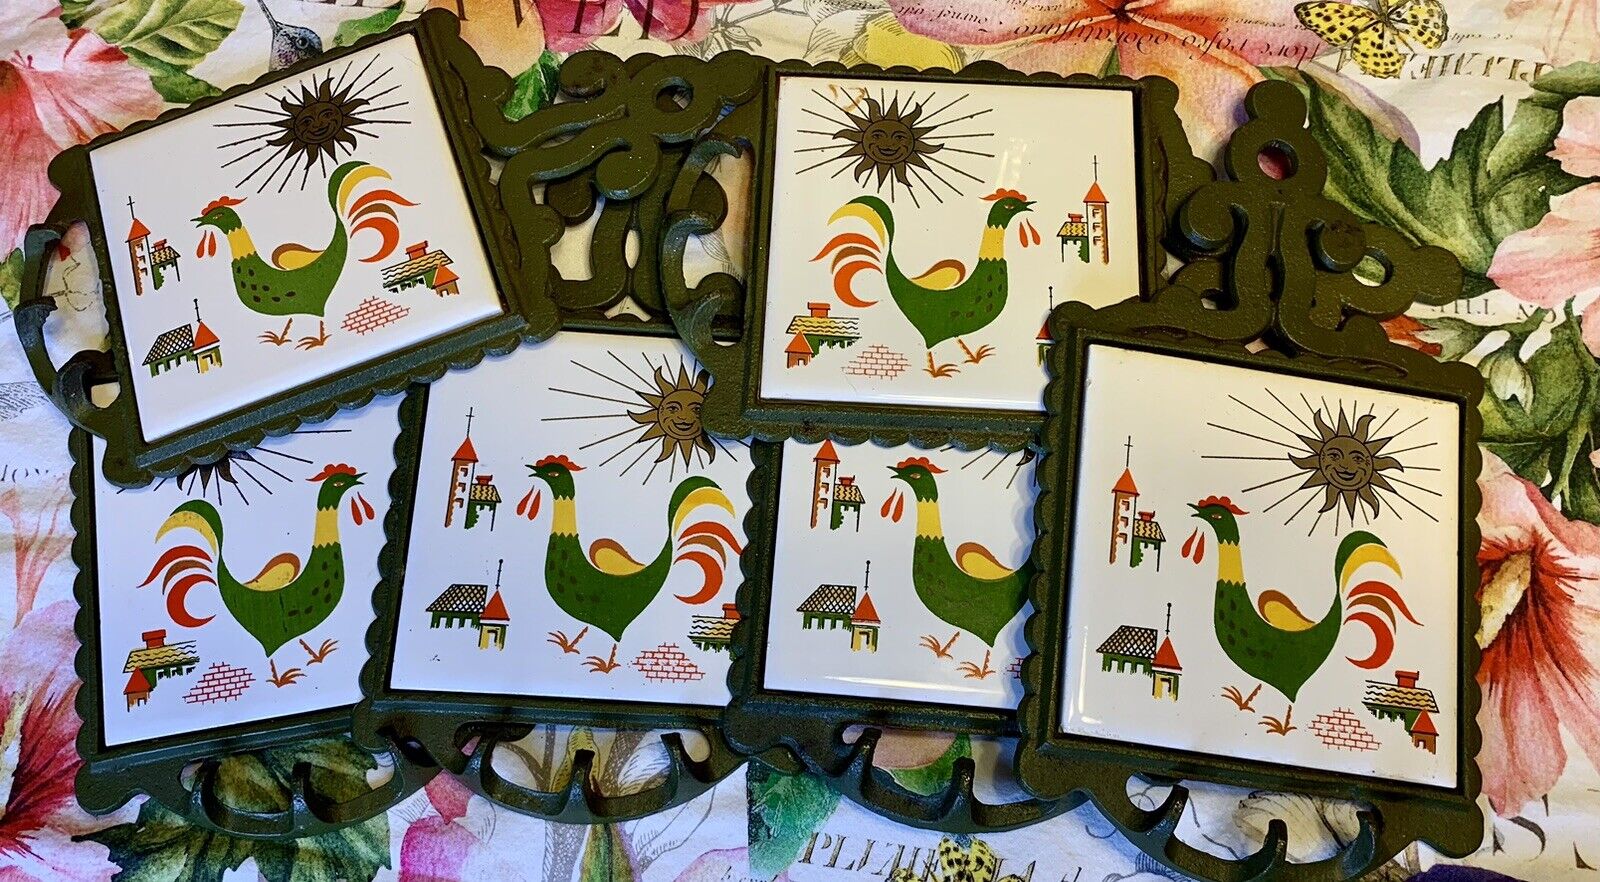 Chickens ROOSTER Ceramic Tile & Cast Iron Trivet Lot Of 6 Green Red Sun Steeple